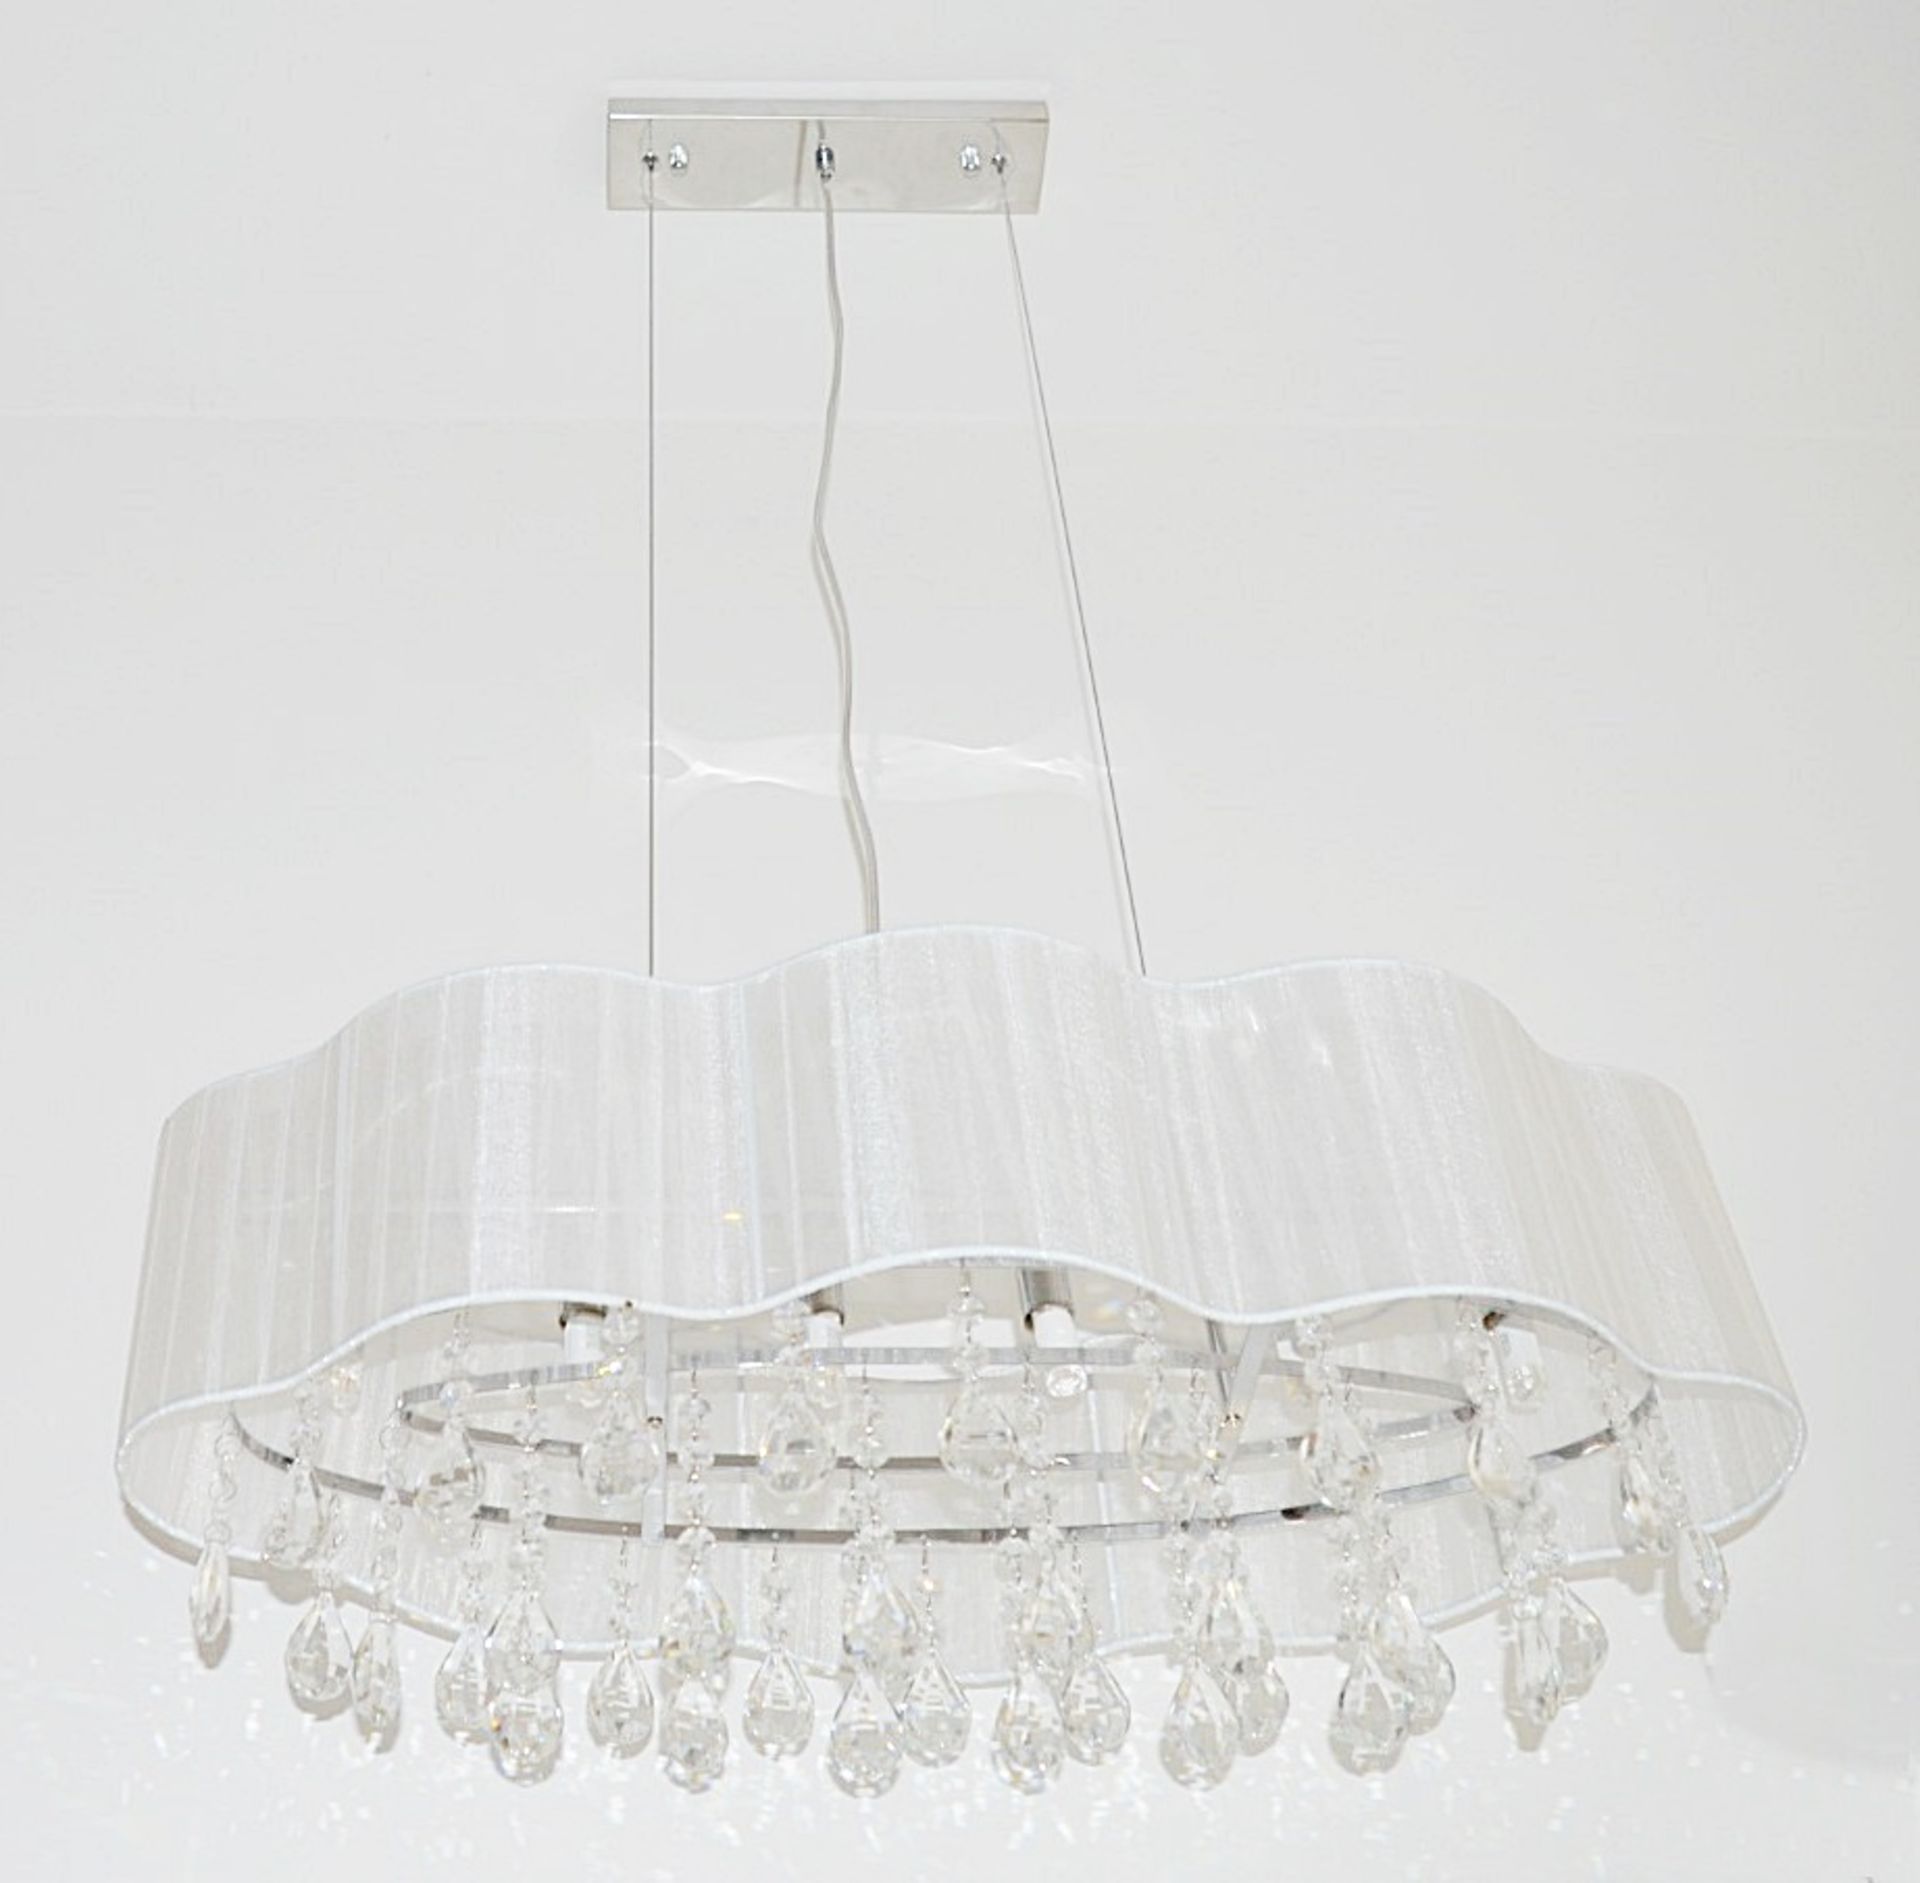 1 x Large Pleated 6-Light Ceiling Light With A Cream Voile Shade - RRP £220.00 - Image 3 of 3